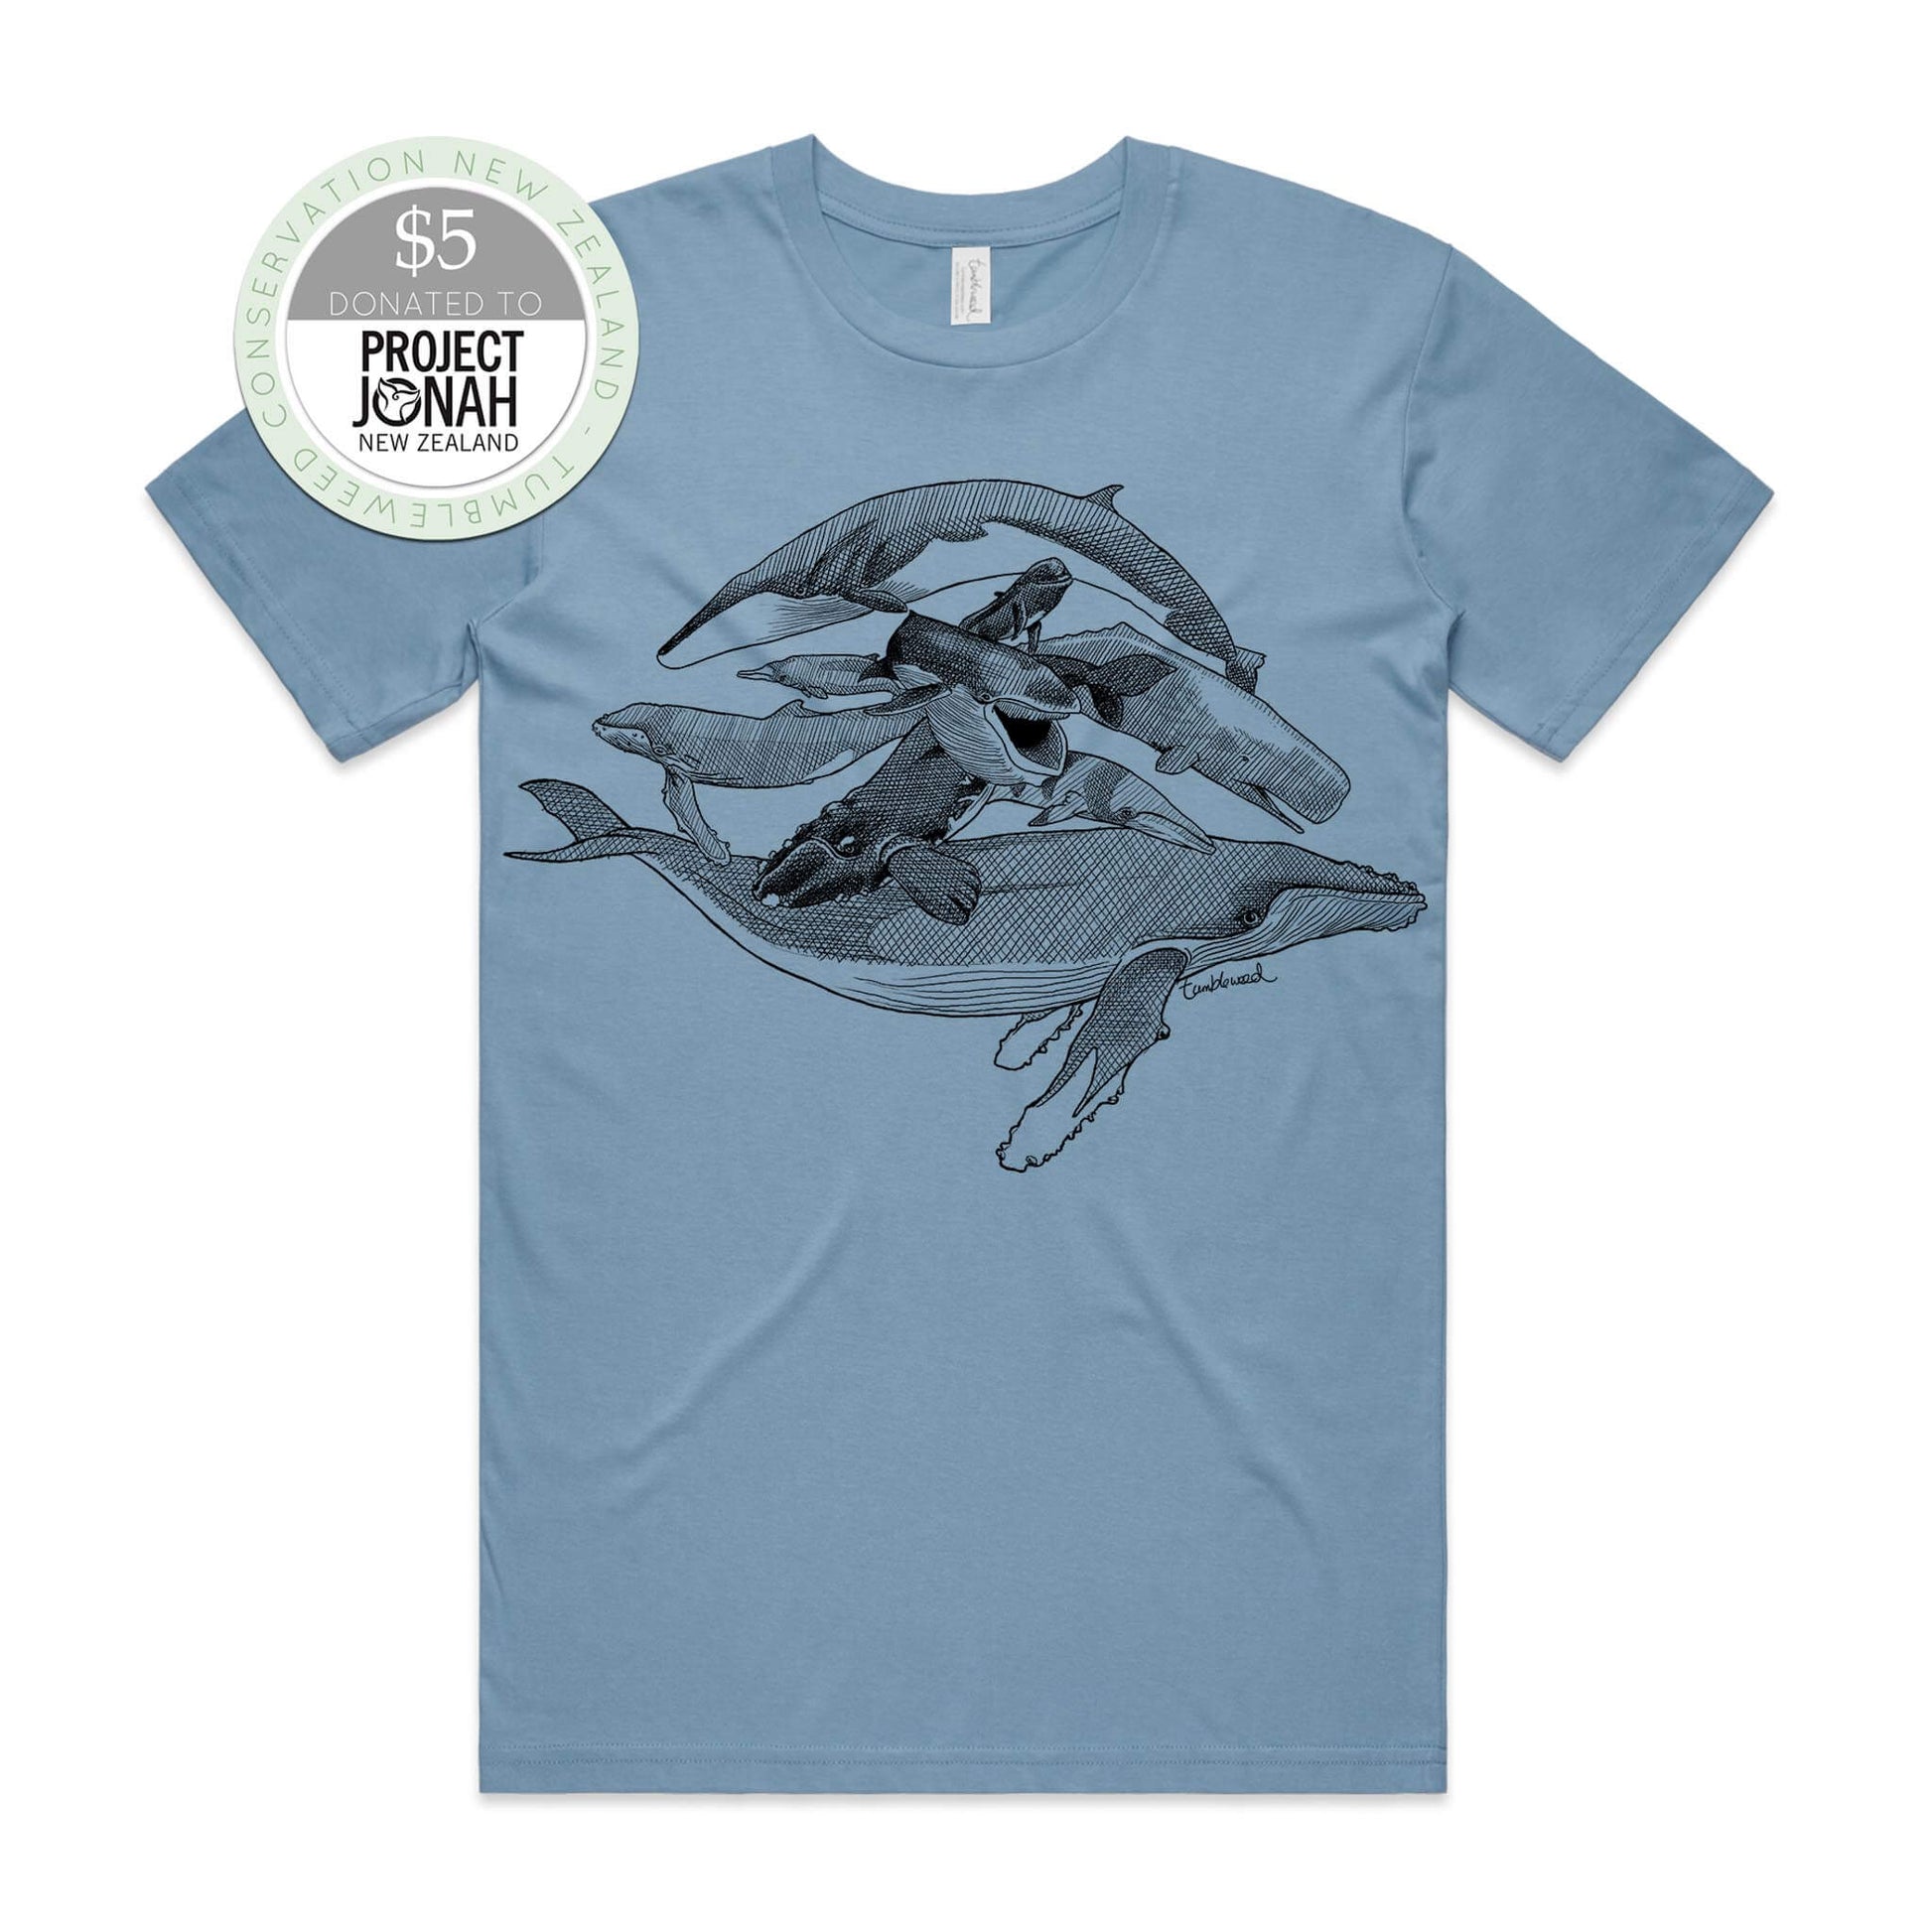 Sage, male t-shirt featuring a screen printed Whales design.